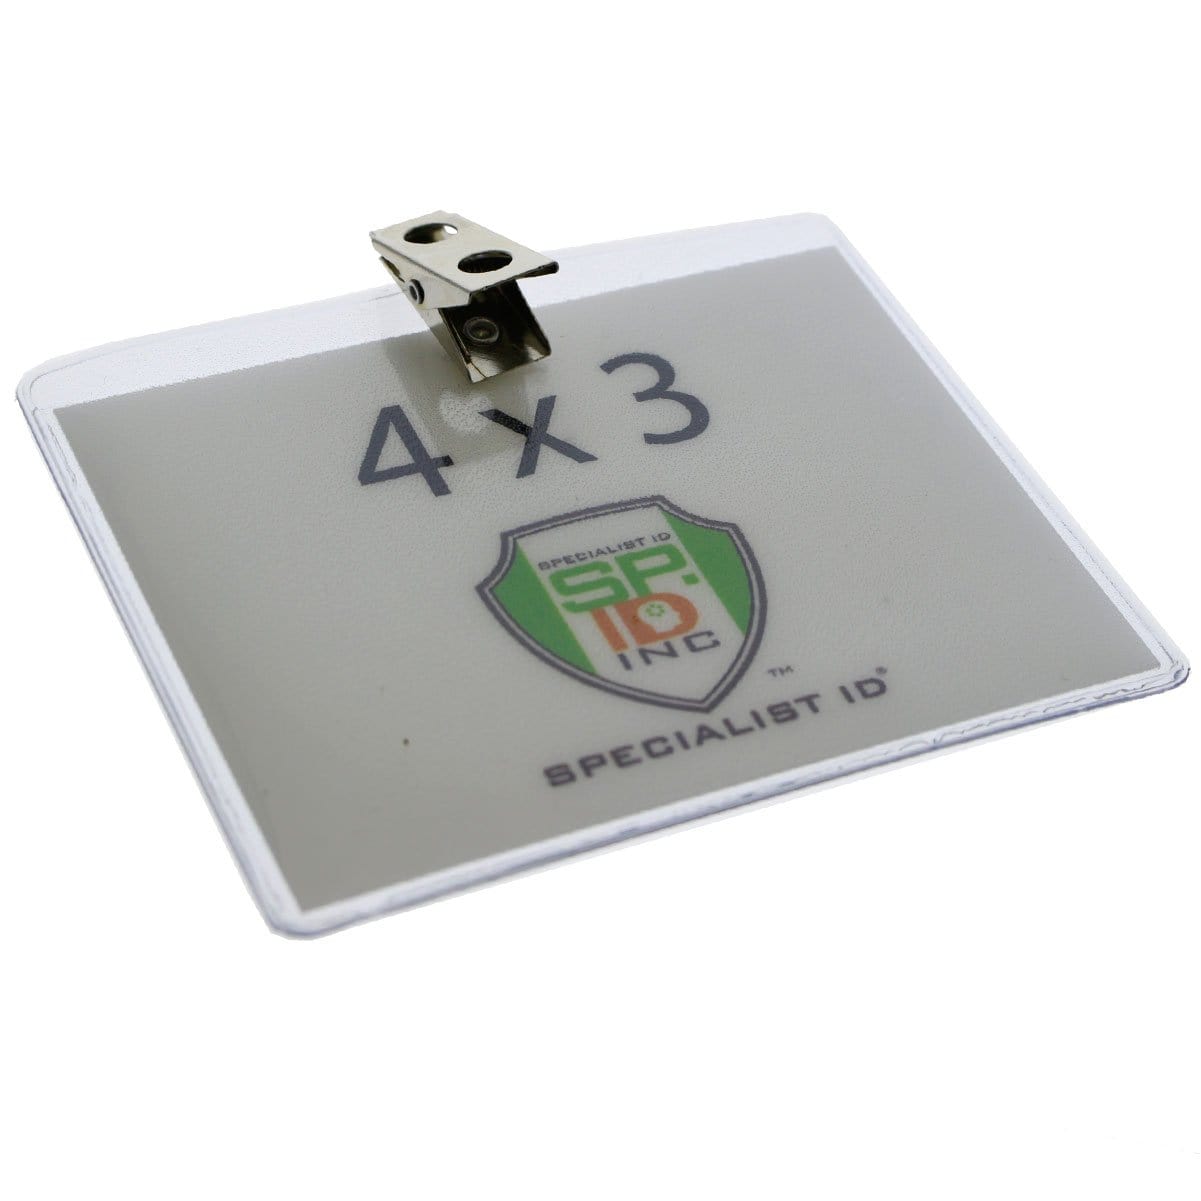 4 x 3 Inch Clear Vinyl Horizontal Badge Holder with Clip (1810-1300) 1810-1300